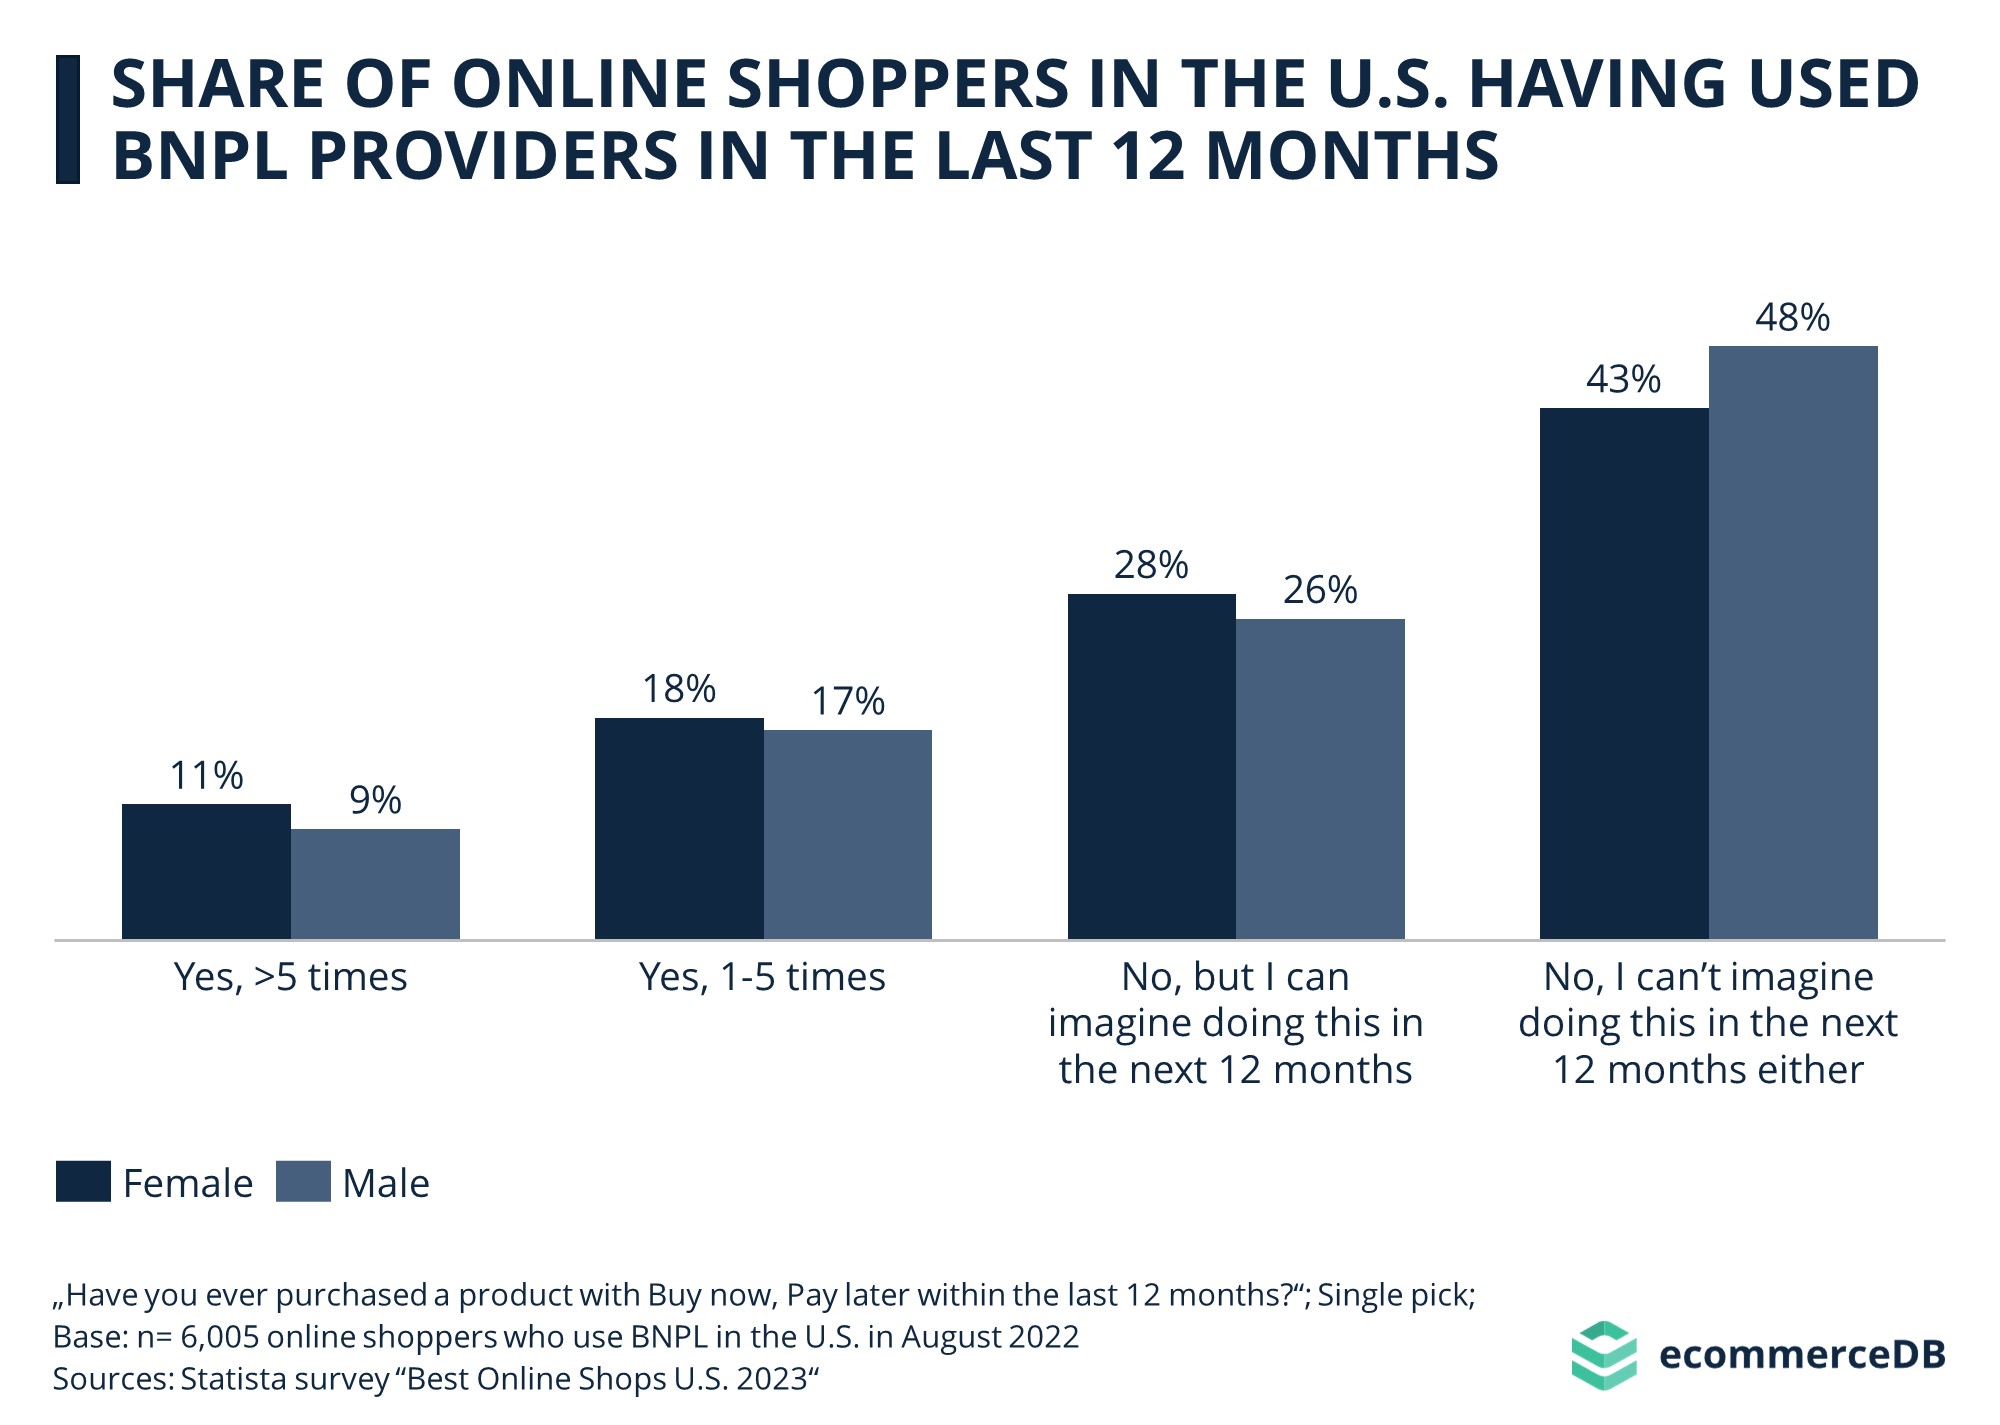 Share of Online Shoppers in the U.S. Having Used Bnpl Providers in the Last 12 Months